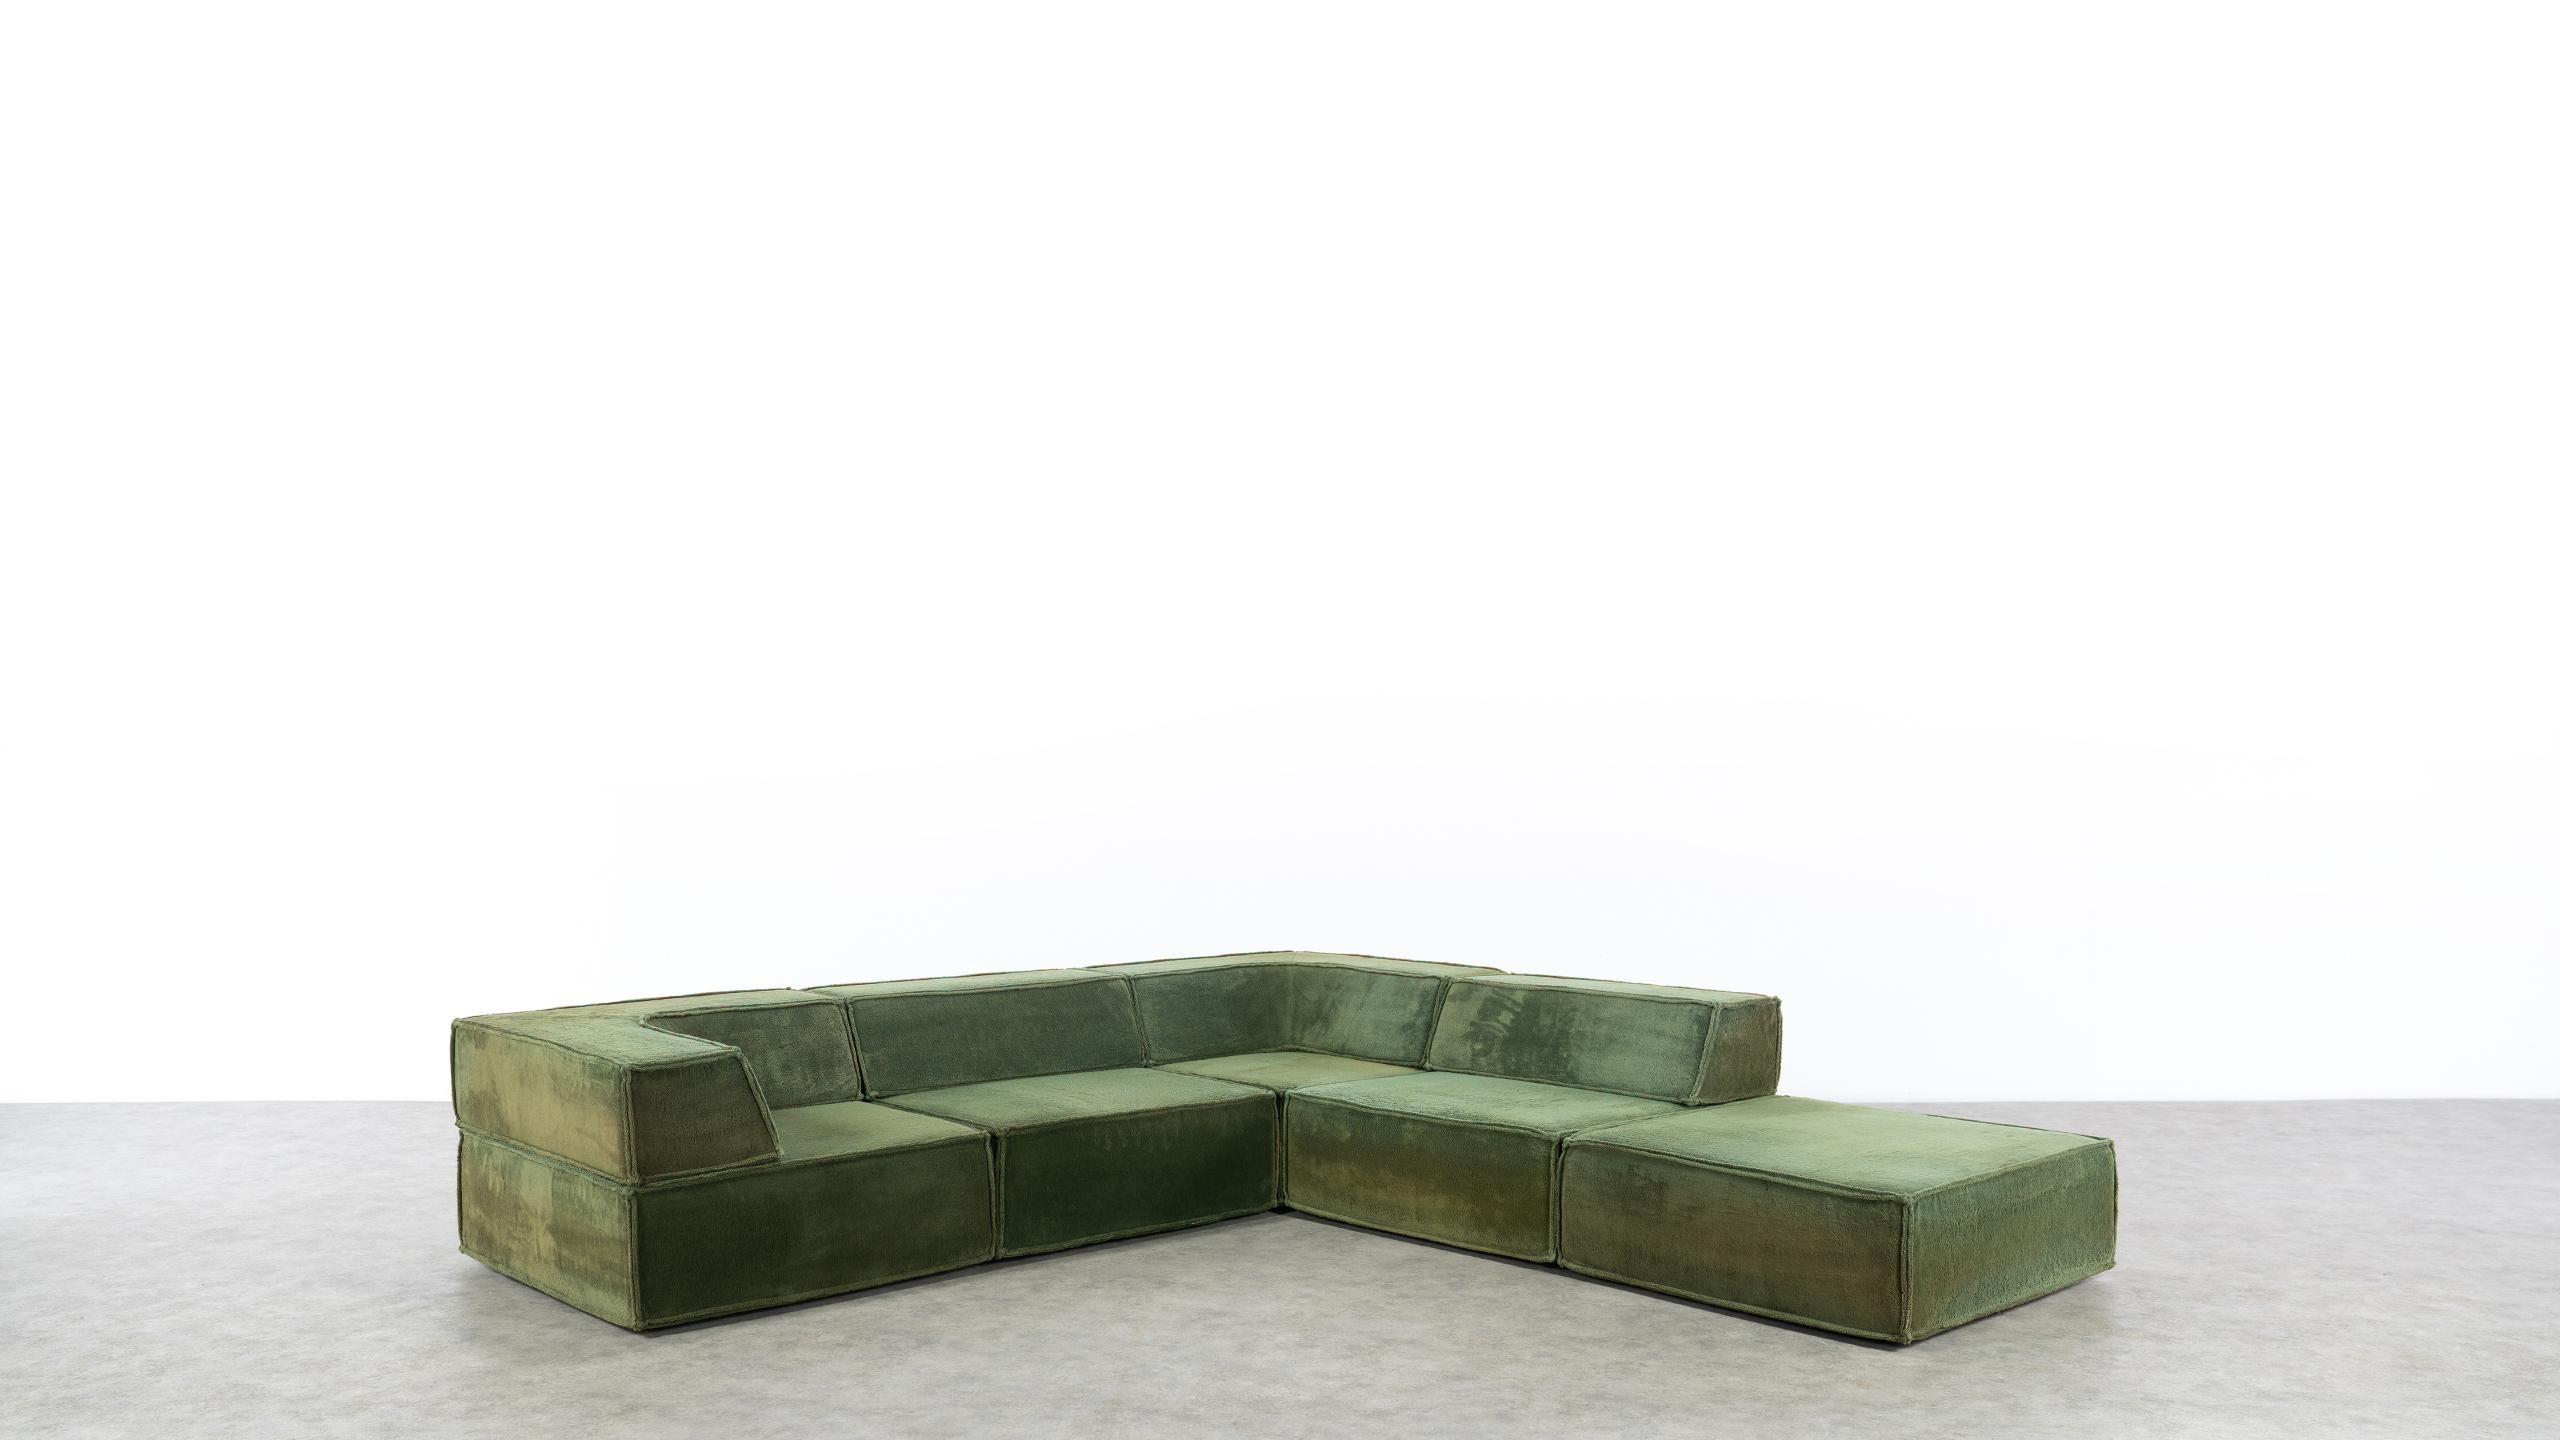 COR Trio Modular Sofa, Giant Landscape in Green, 1972 by Team Form AG, Swiss 6